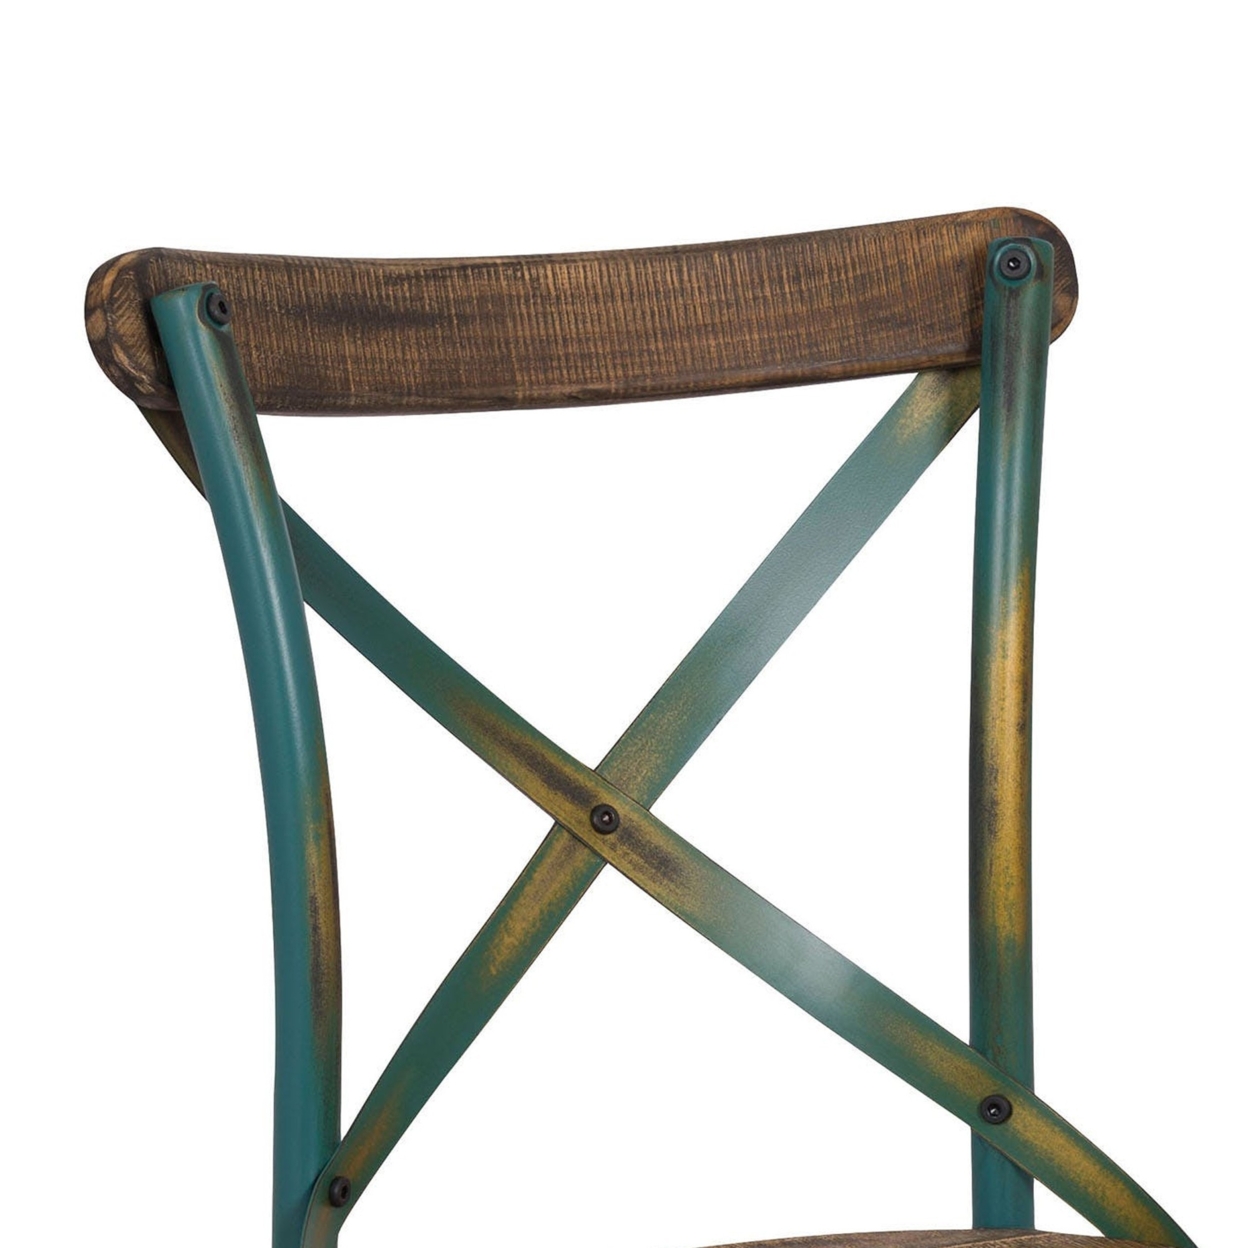 Industrial Style Wooden And Metal Frame Side Chair, Brown And Turquoise- Saltoro Sherpi